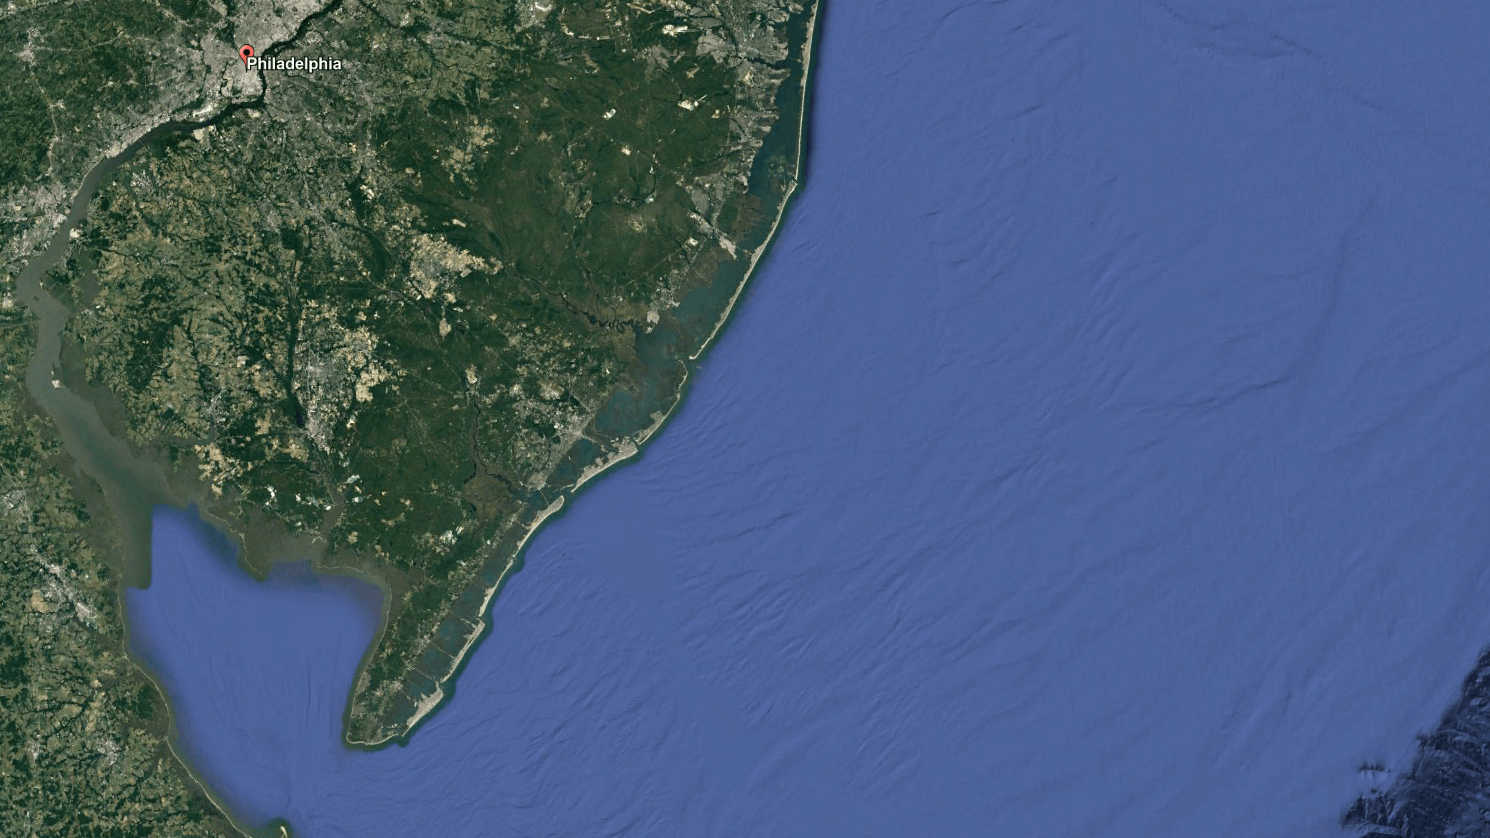 A map of the Atlantic Seaboard shows how the Delaware River connects Philadelphia to the Atlantic Ocean